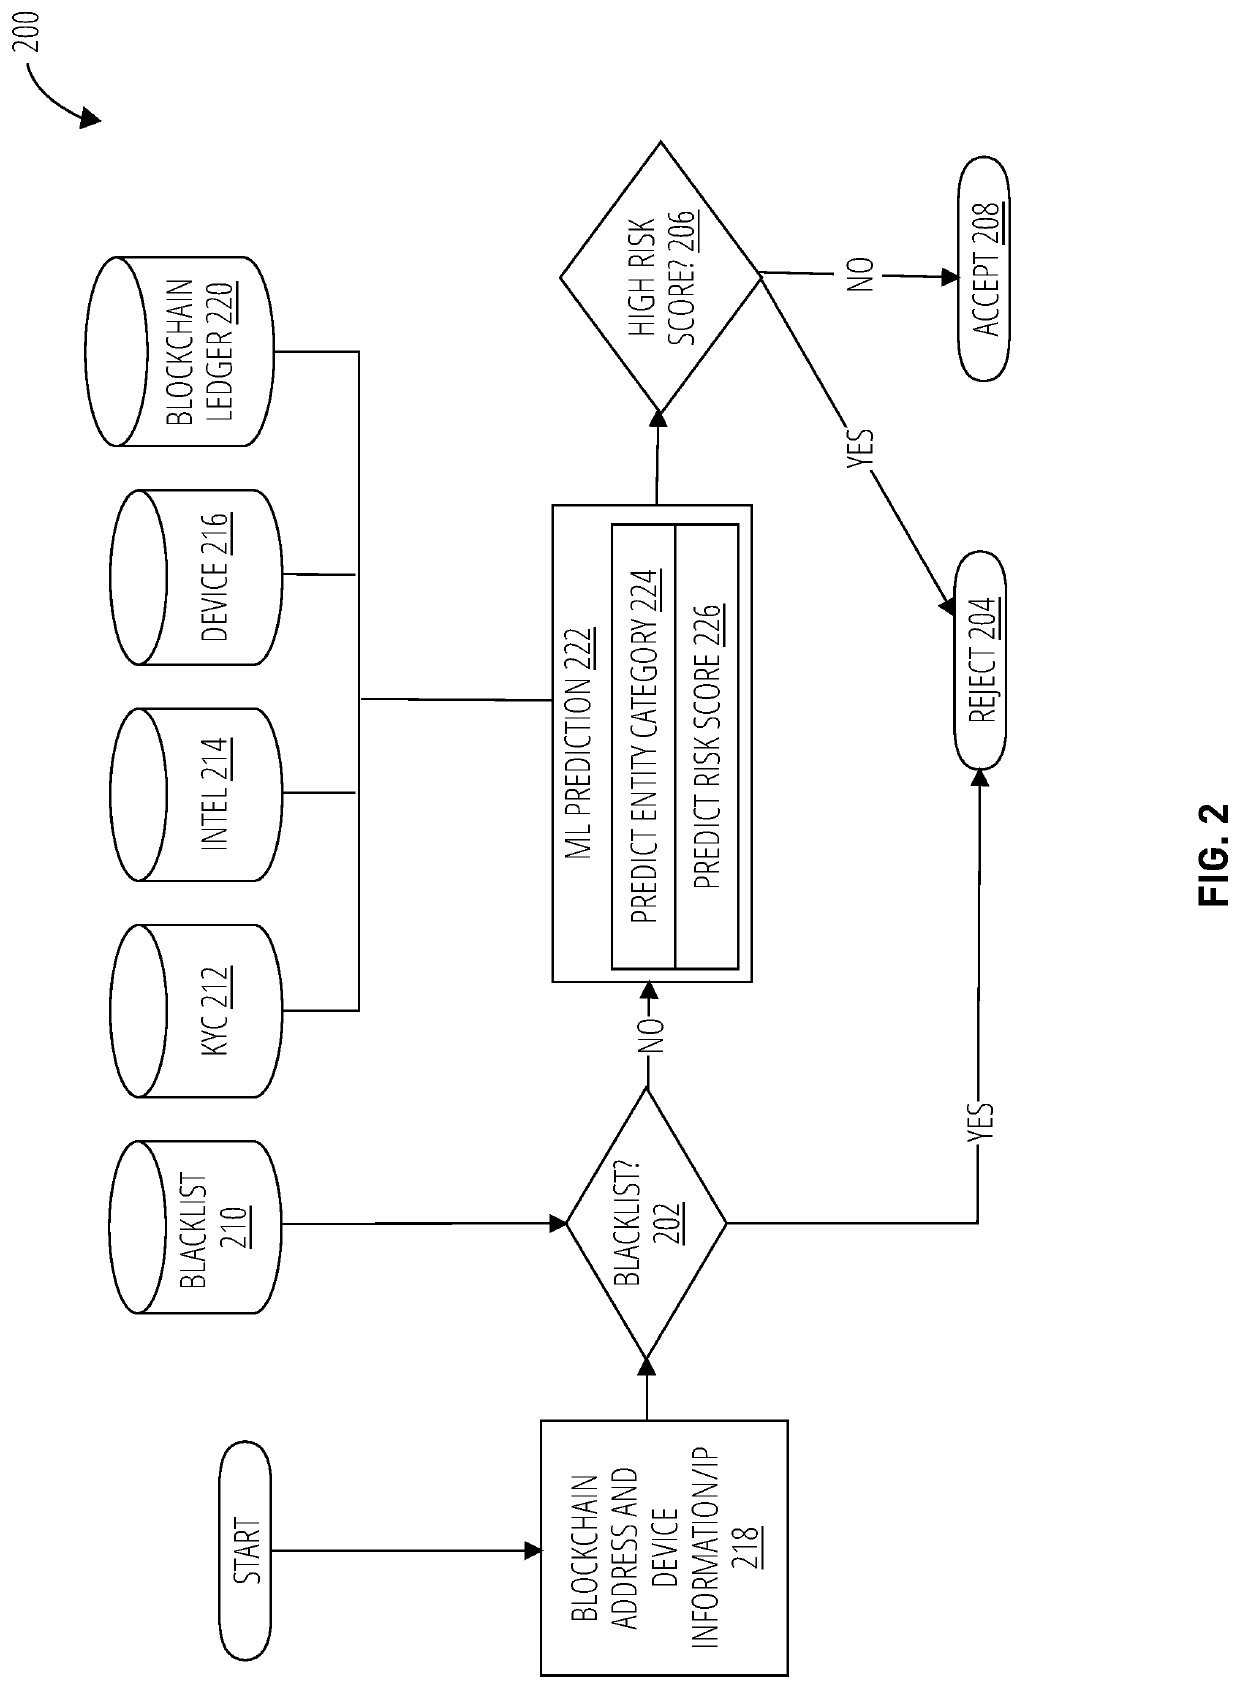 System and Method for Blockchain Automatic Tracing of Money Flow Using Artificial Intelligence